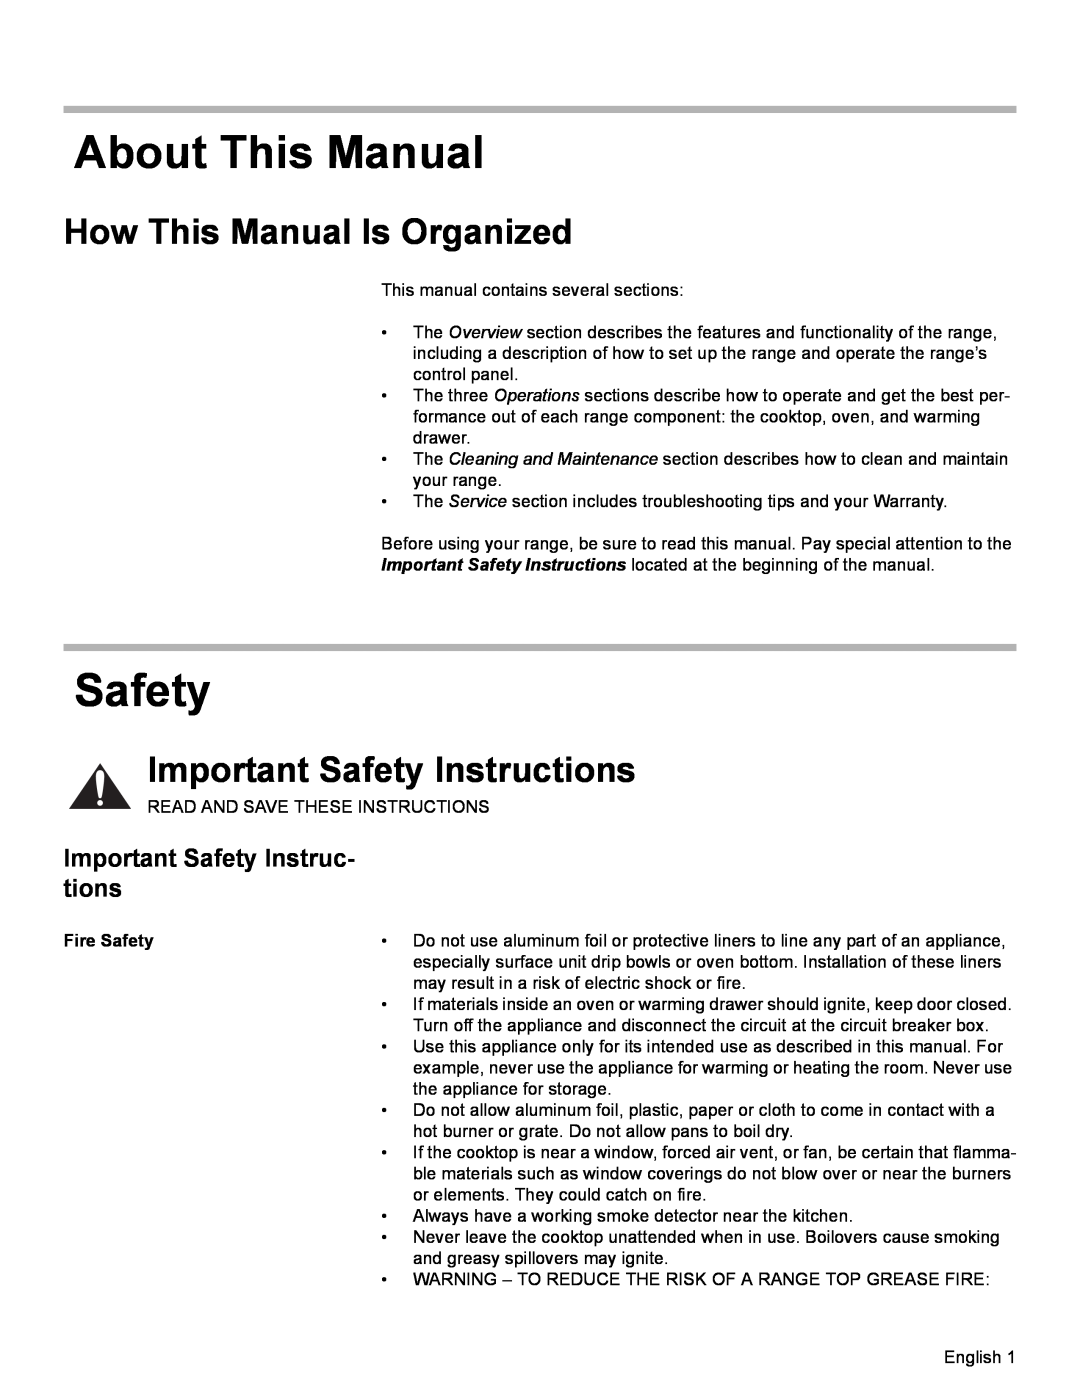 Bosch Appliances HES7282U About This Manual, How This Manual Is Organized, Important Safety Instructions, Fire Safety 